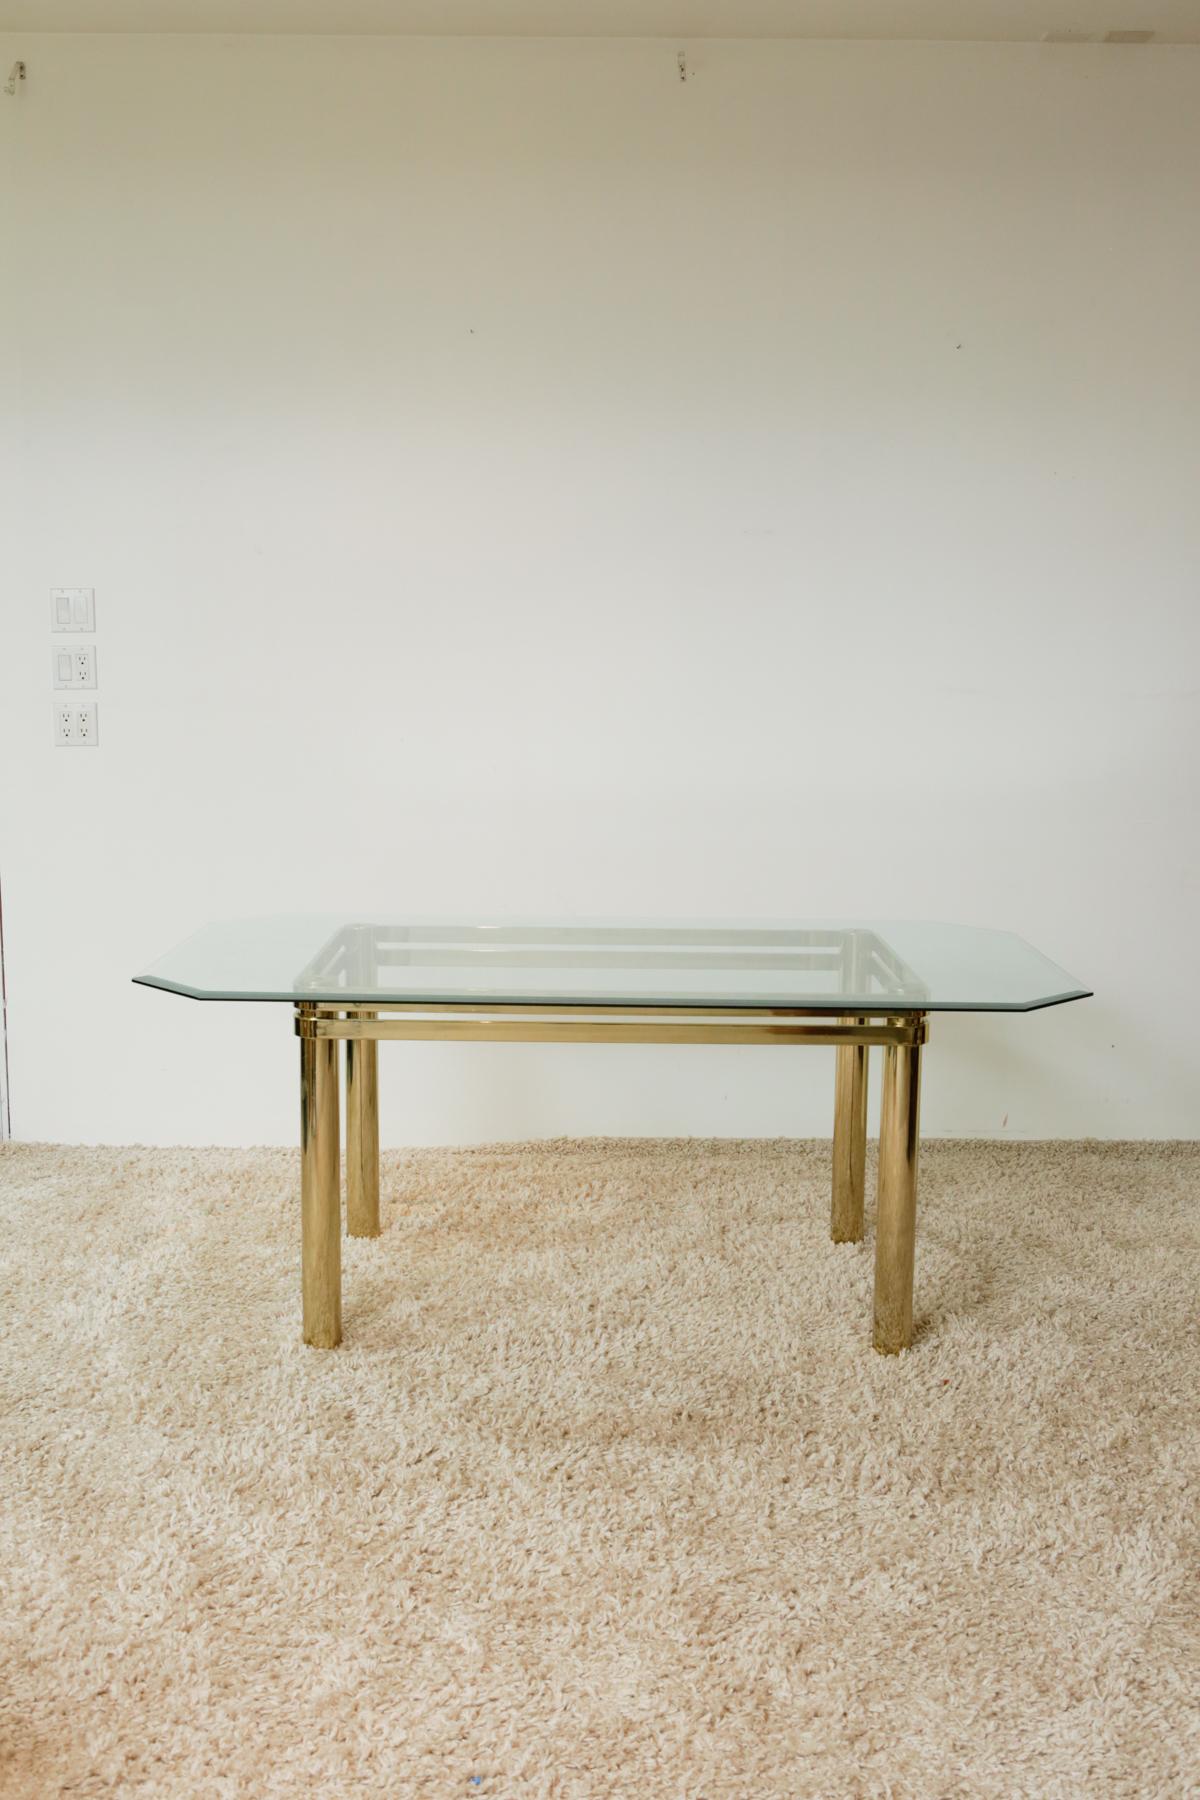 Karl Springer Hollywood Regency style brass and glass dining table

Gorgeous vintage 1970s polished brass base and glass top Hollywood Regency dining table. Designed in the style of Karl Springer. Features a quadrilateral glass with diagonal edges